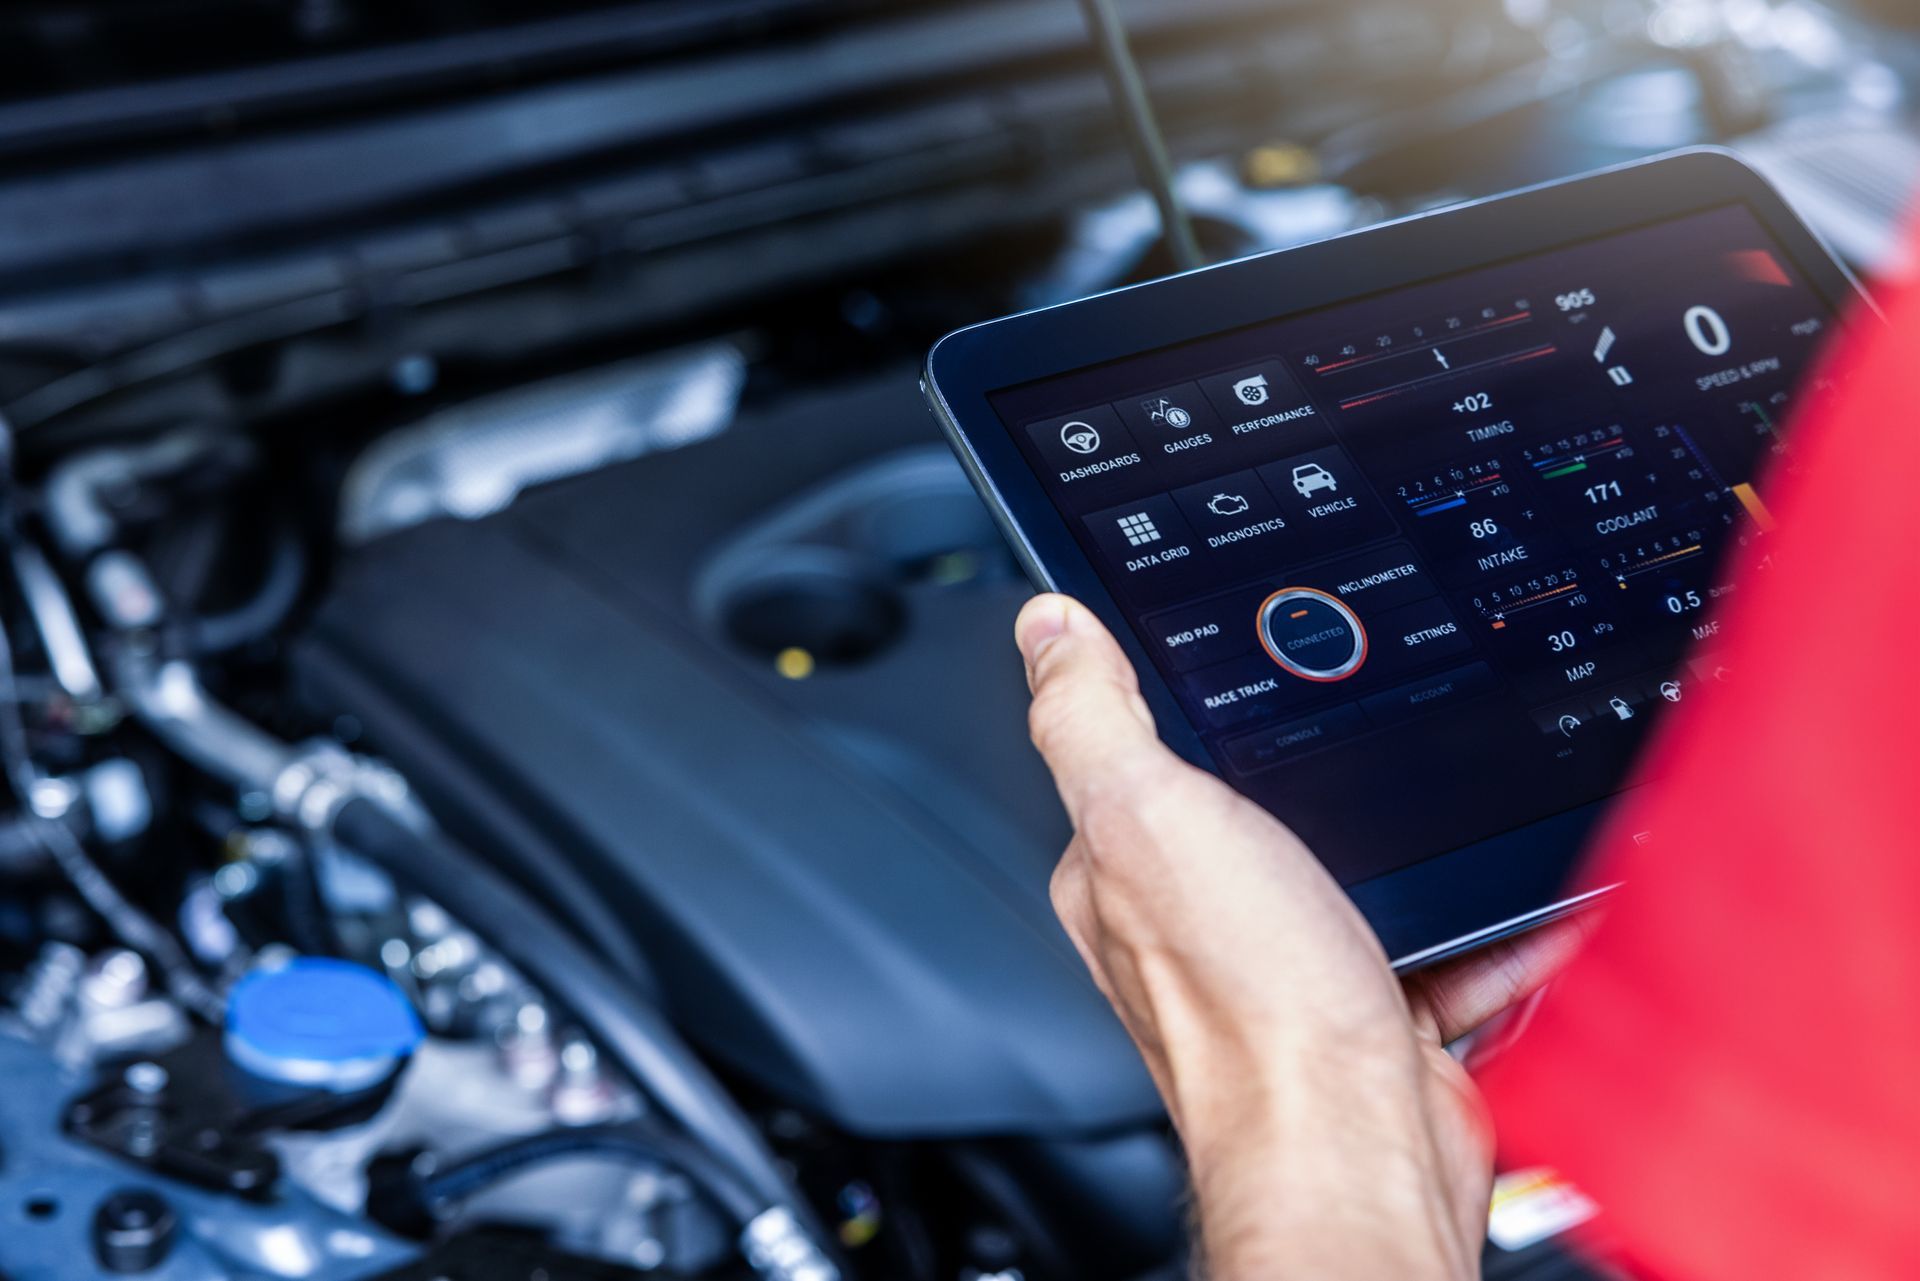 Digital Inspections at ﻿Capeway Auto Service and Towing﻿ in ﻿Hanover, MA﻿